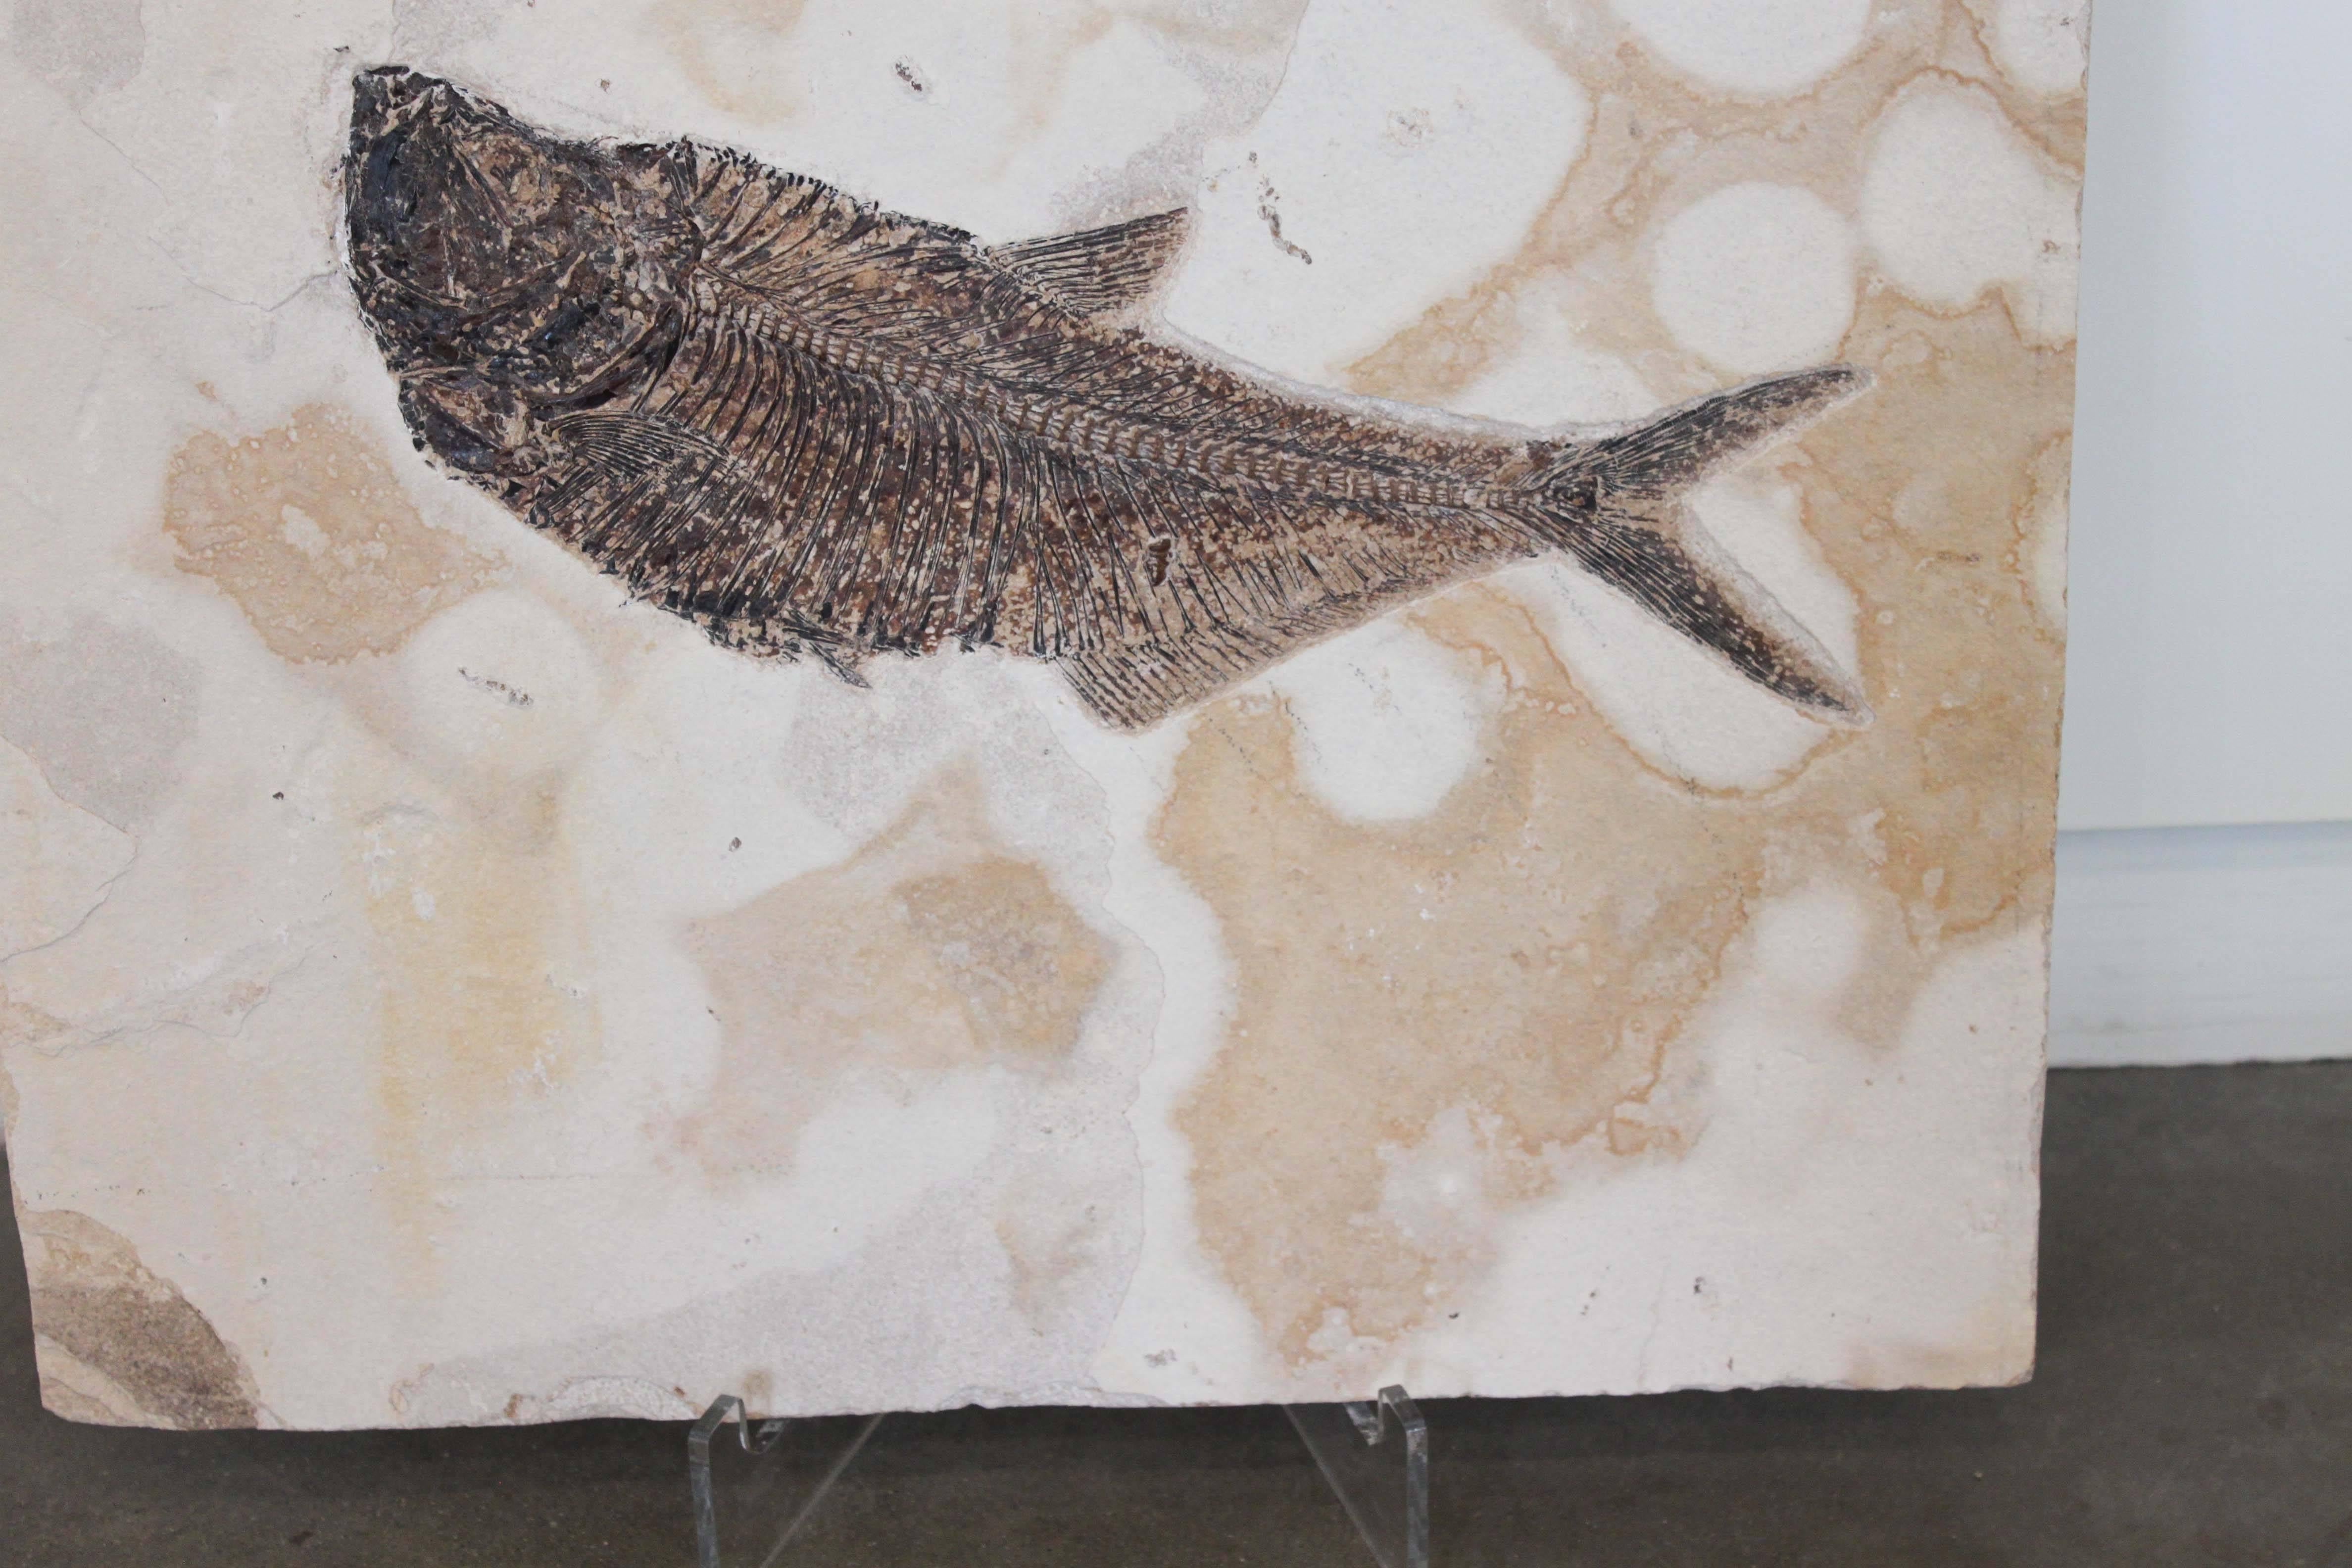 Diplomystus Dentaus Fish Fossil Plate from the Green River Formation 1